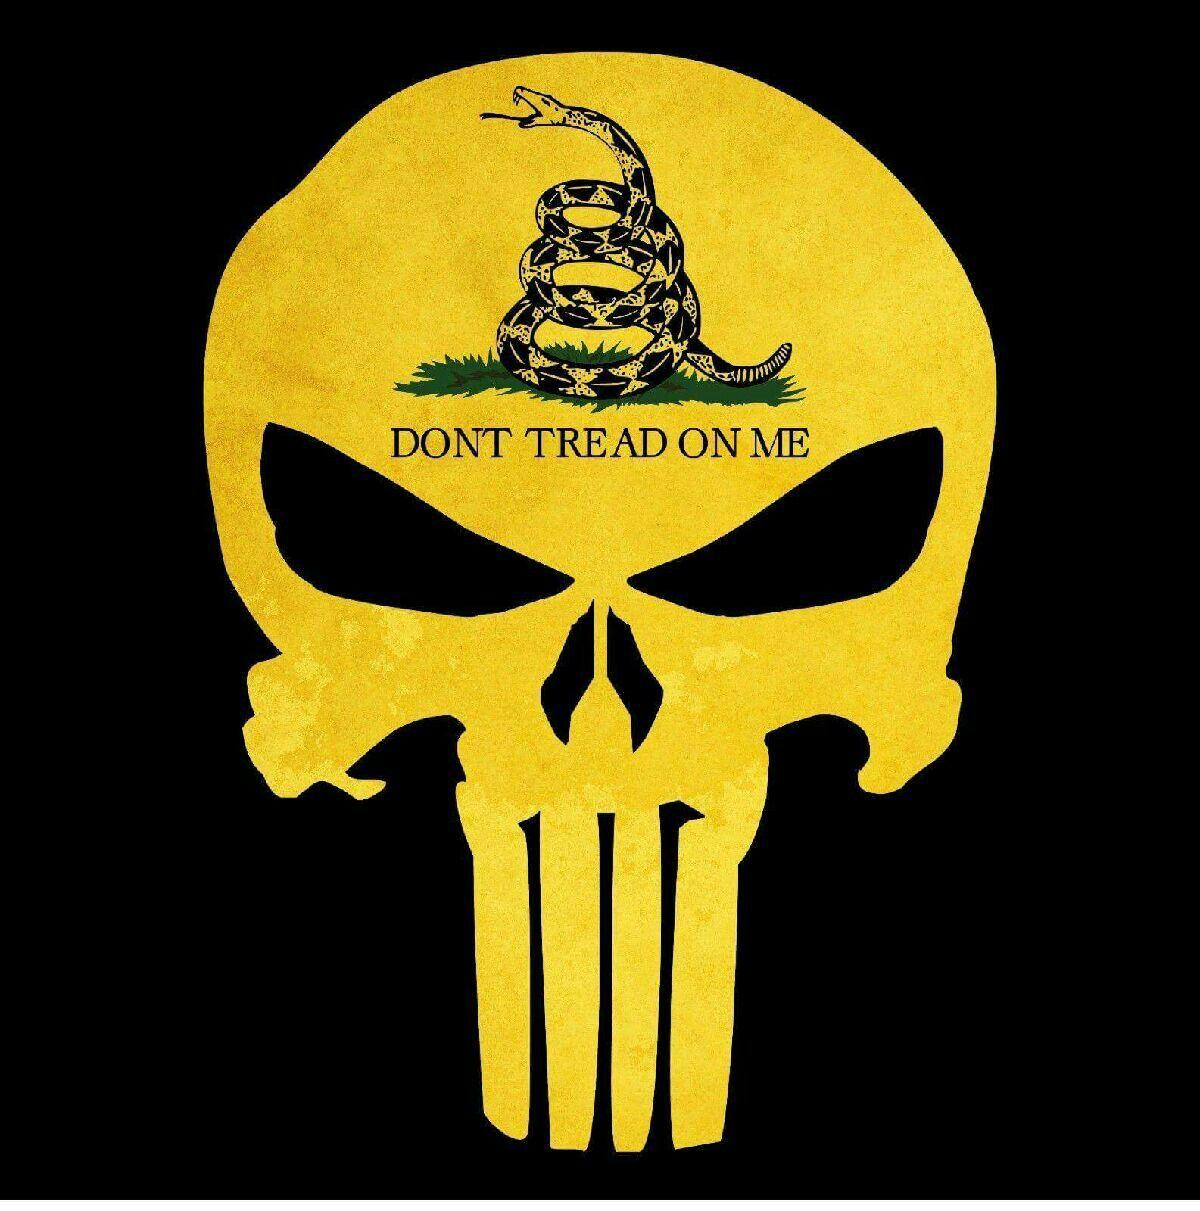 Don't tread on me!!!. Dont tread on me, Punisher artwork, Black stickers